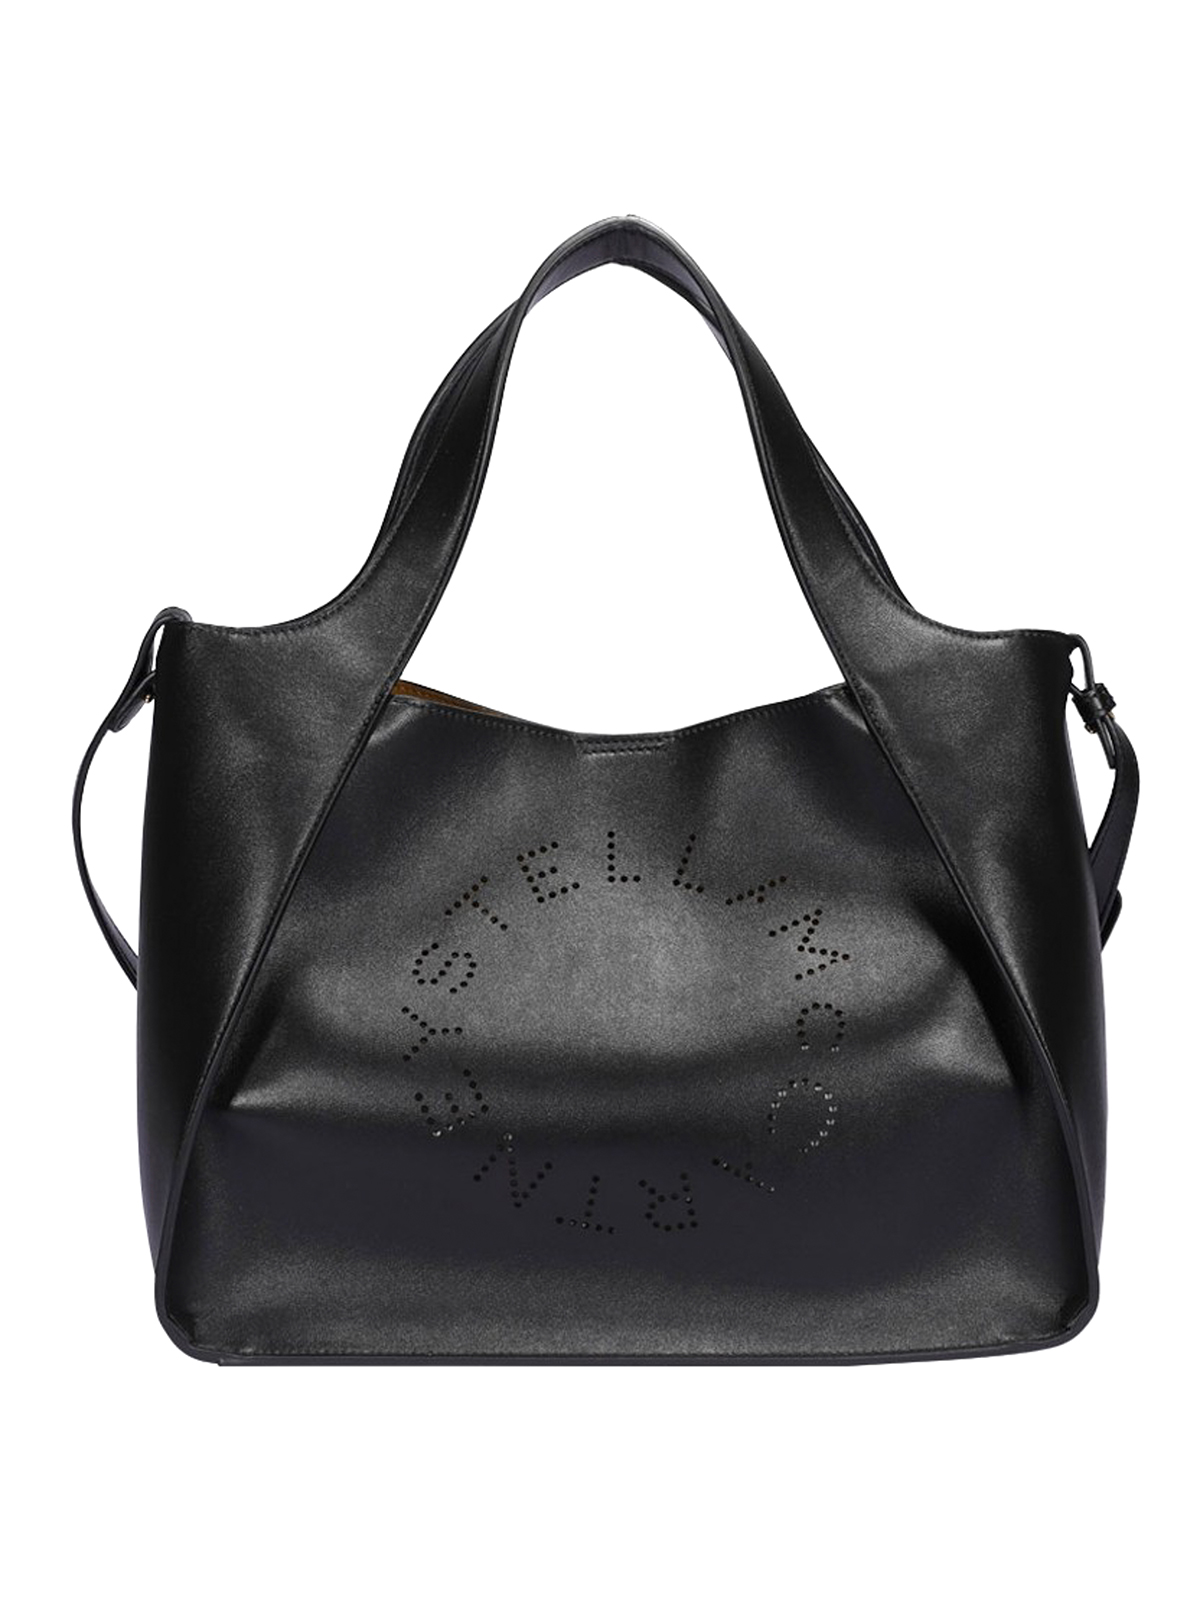 Totes bags Stella Mccartney - Perforated logo black faux leather bag ...